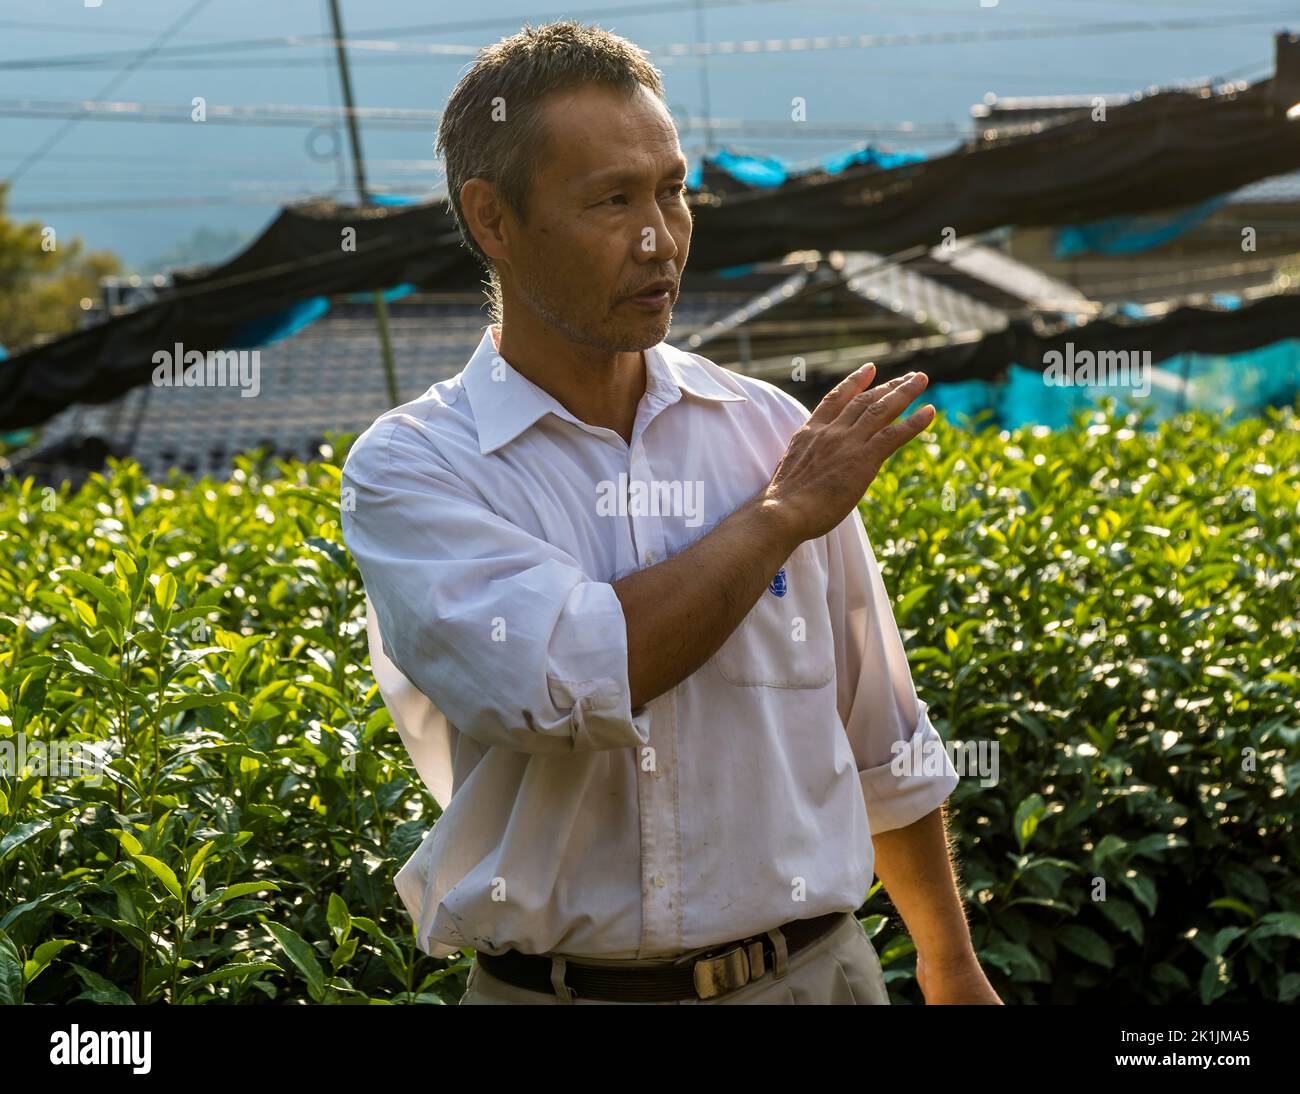 Kiyomi Uchino in the tea fields at his farm. Depending on the weather, he pulls nets over the tea plants. This allows him to influence the aroma of his harvest. Less sunlight means less bitterness and astringency. Shizuoka, Japan Stock Photo